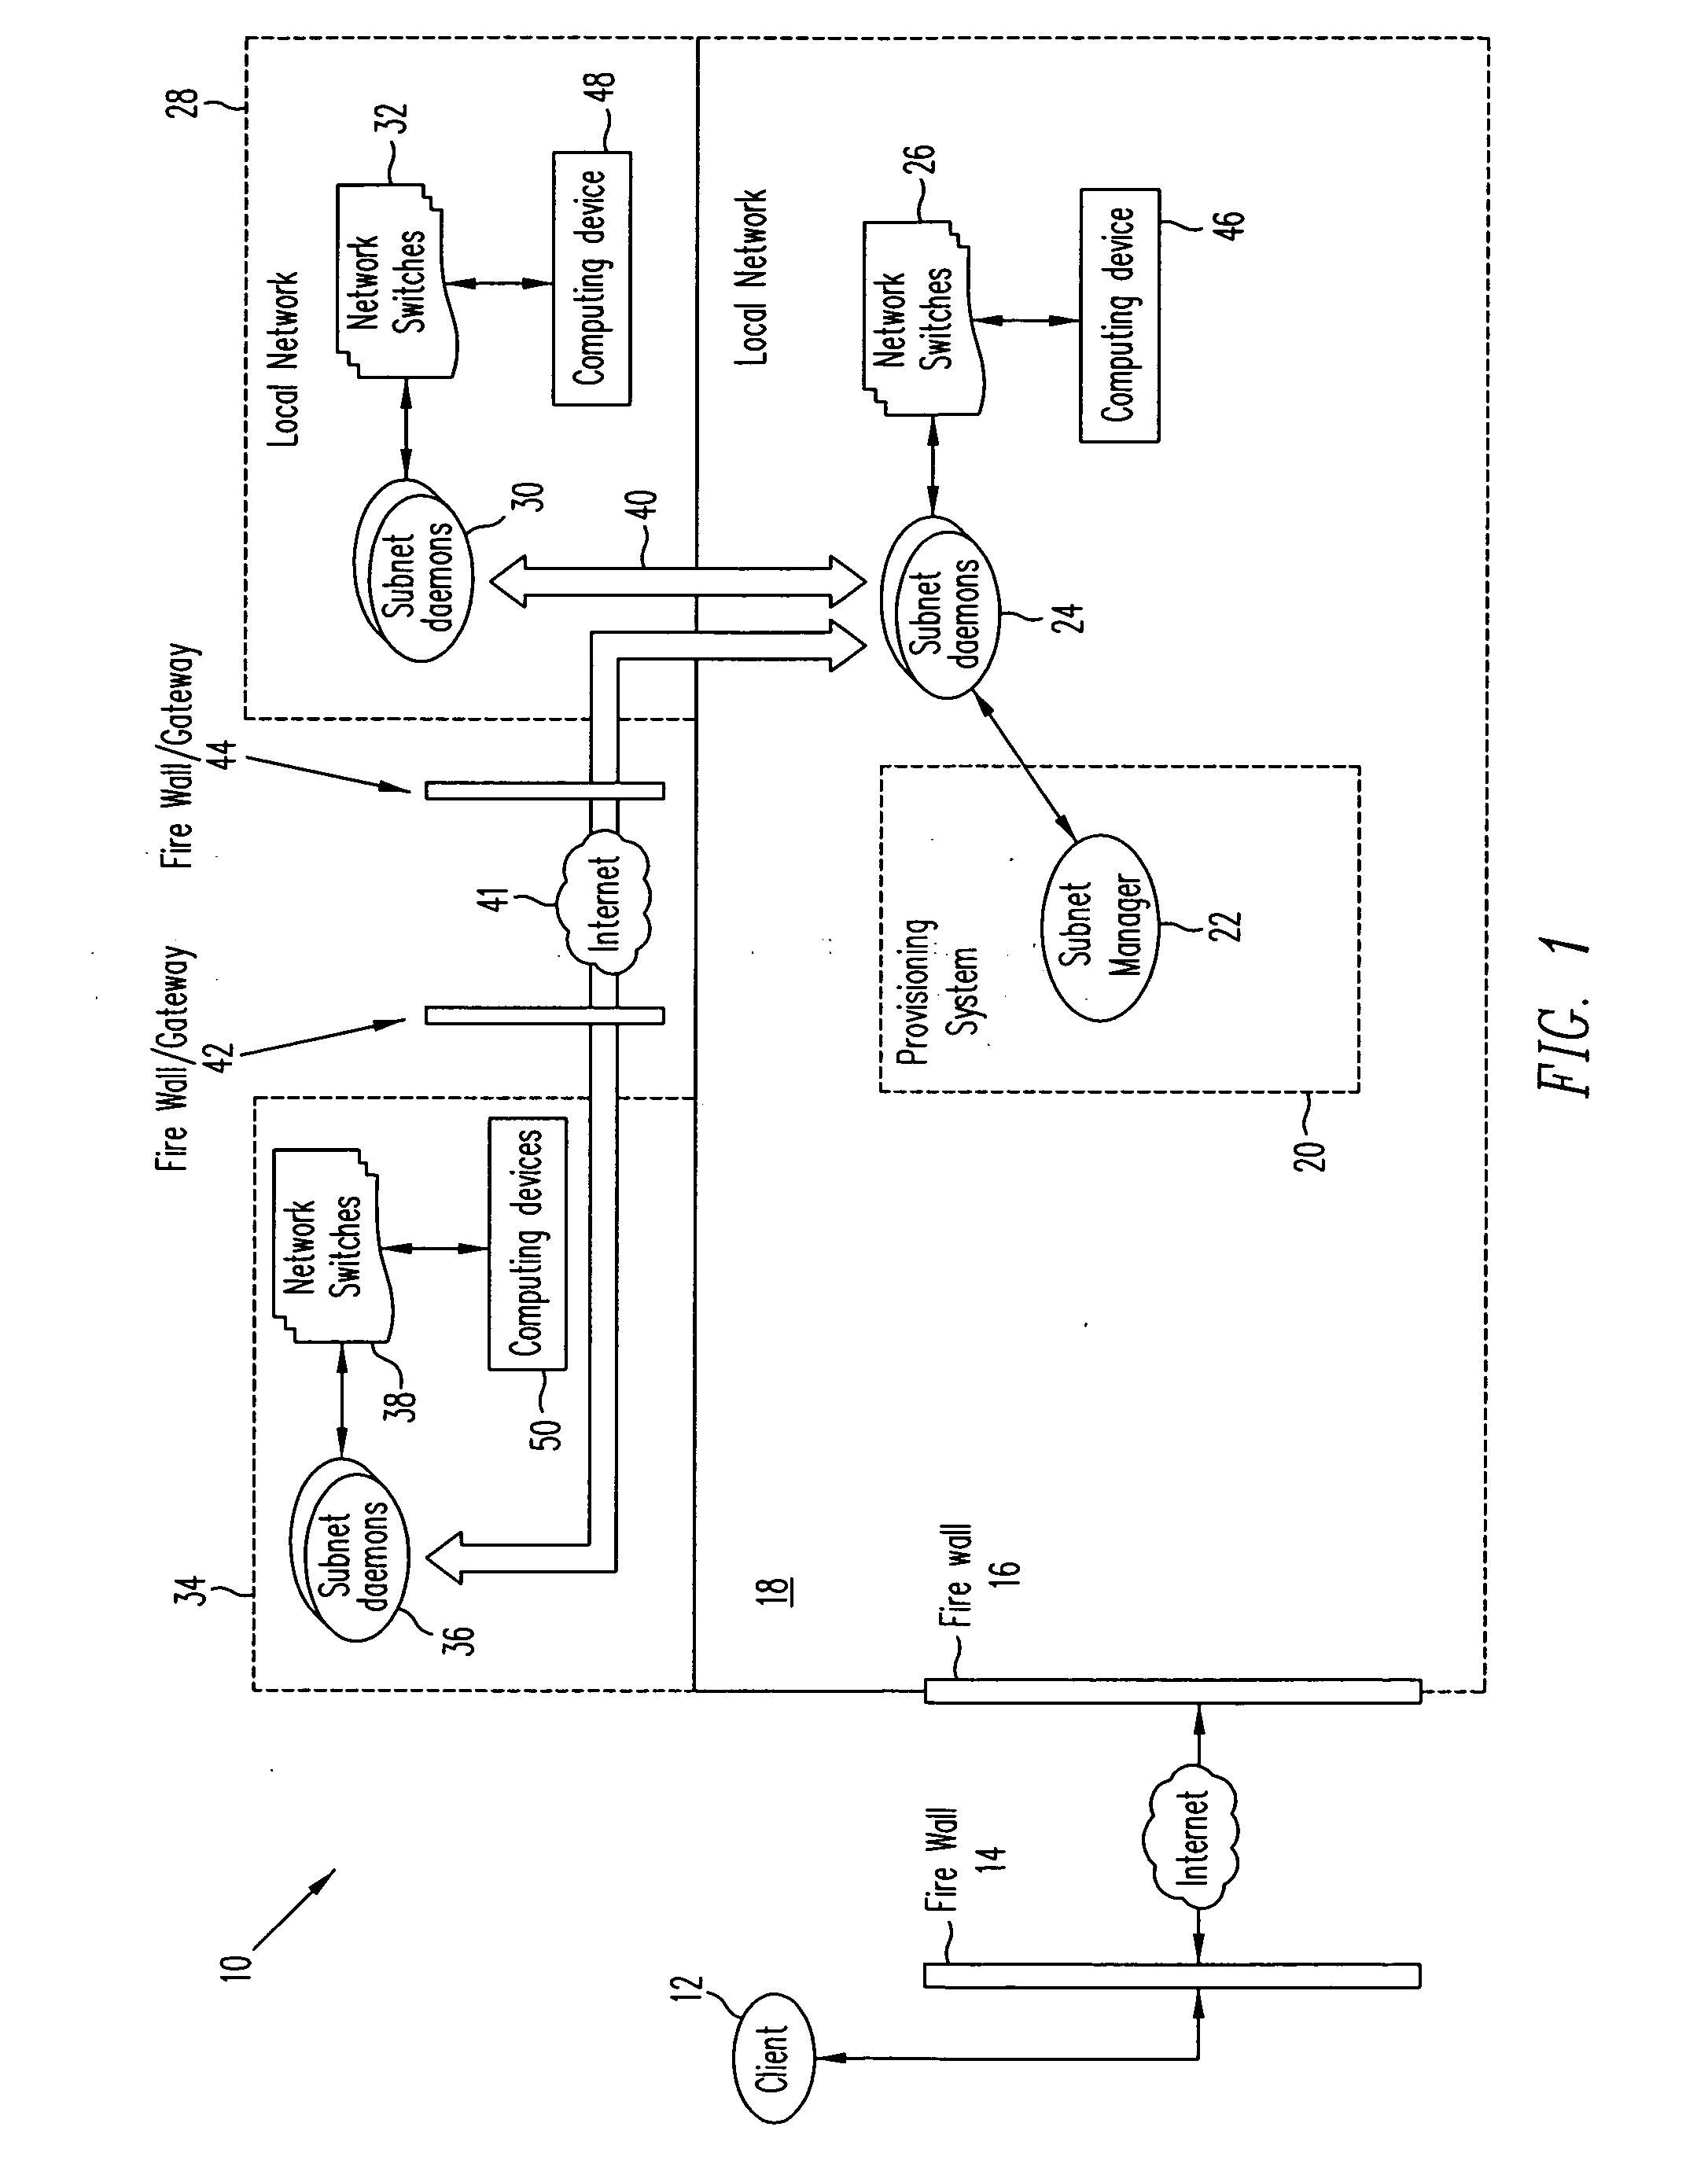 System for dynamic provisioning of secure, scalable, and extensible networked computer environments